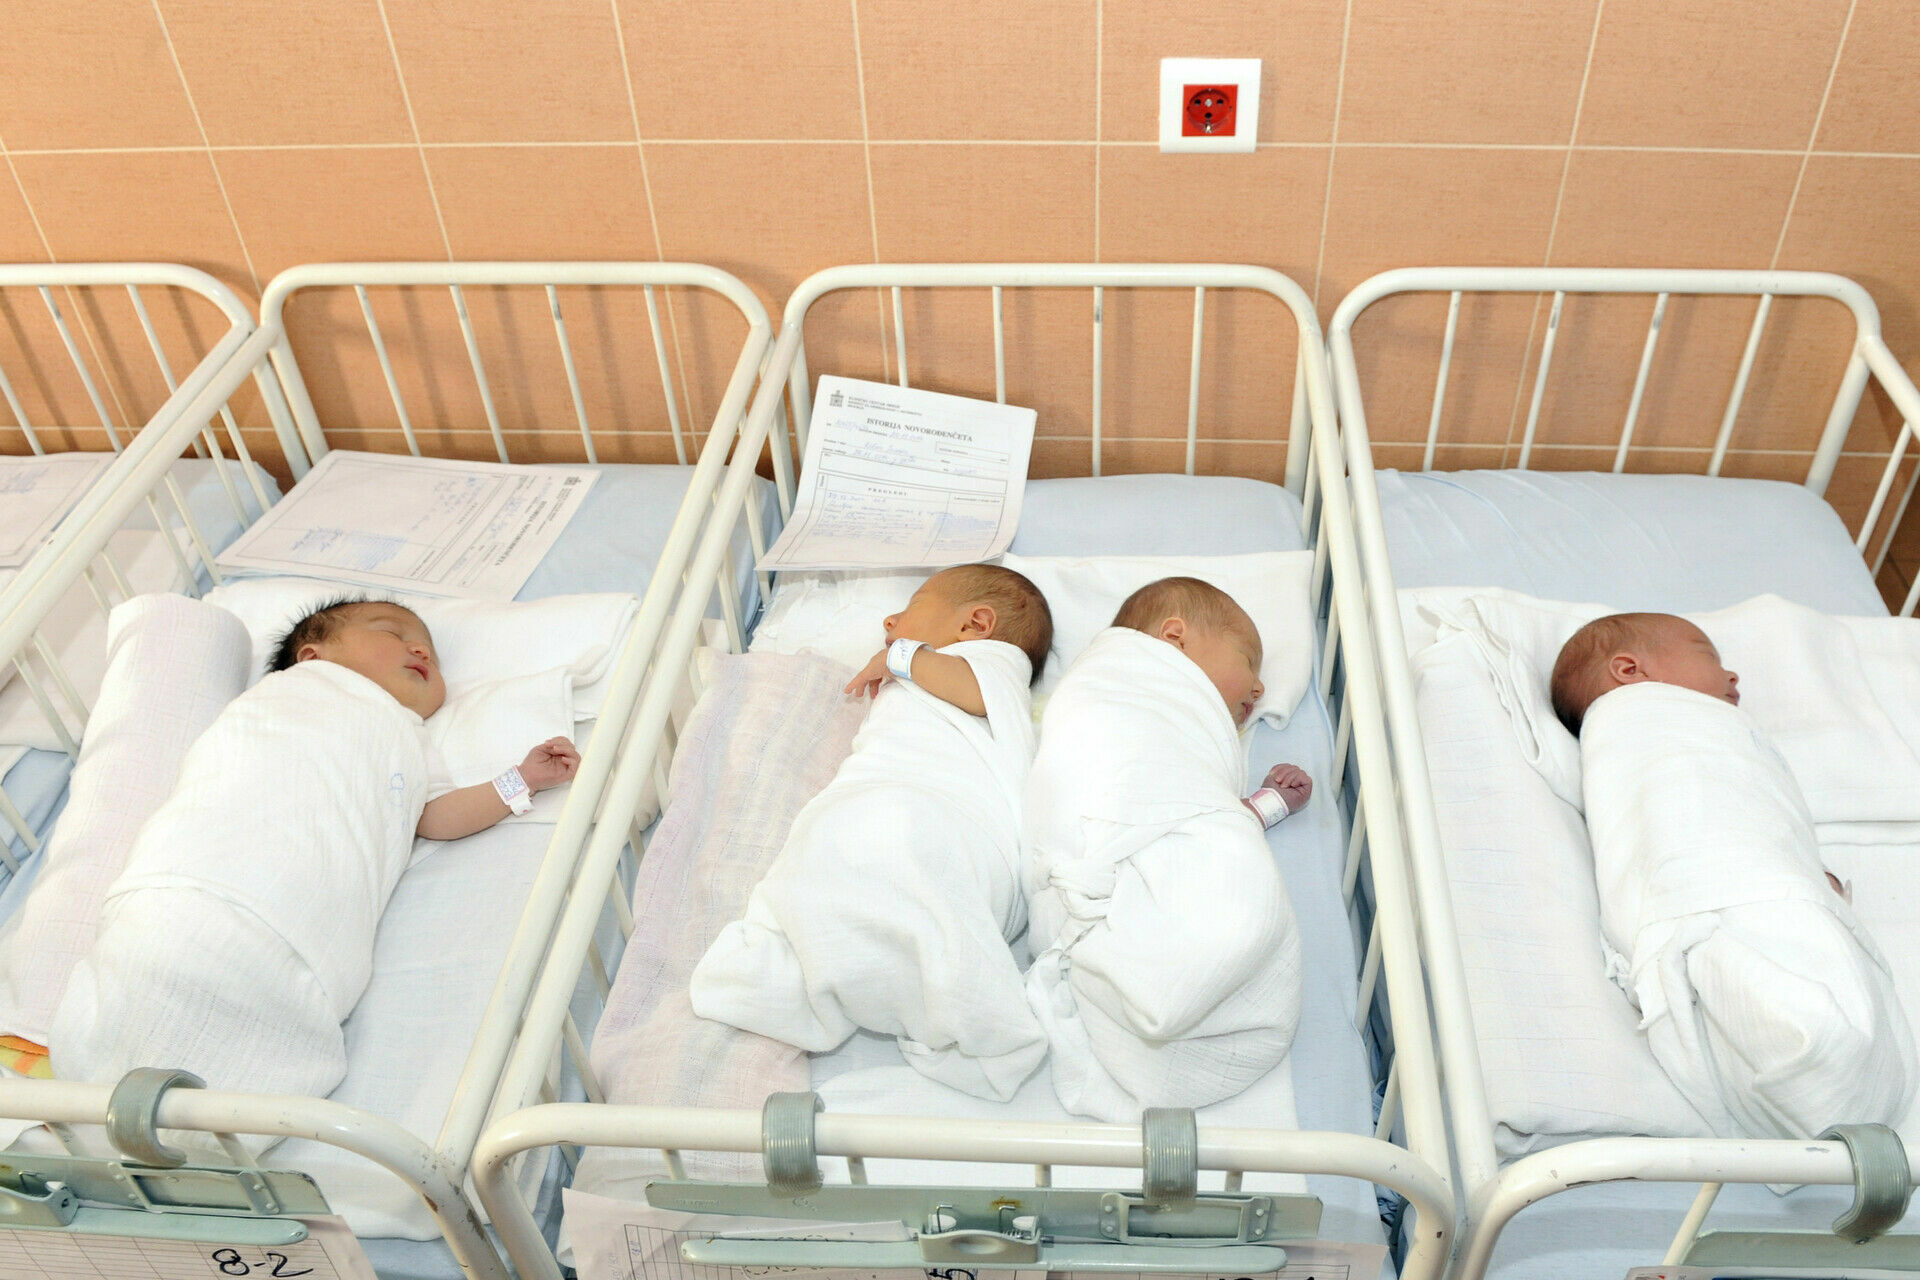 Thousand children from surrogate mothers stuck in Russia